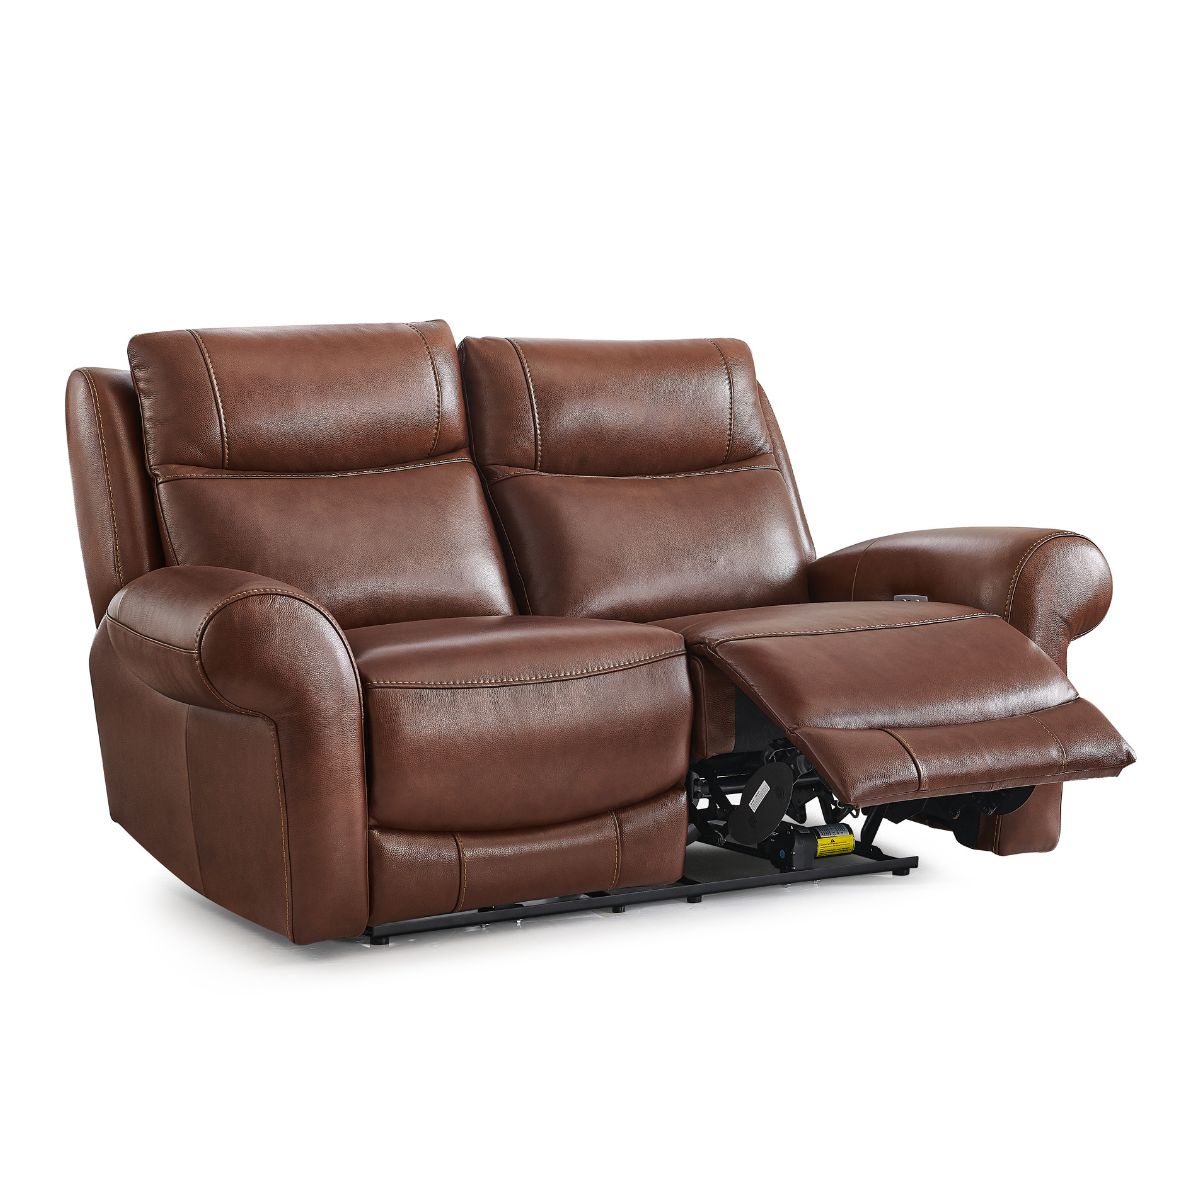 Lindfield Tan Leather 2 Seater Powered Recliner - 2